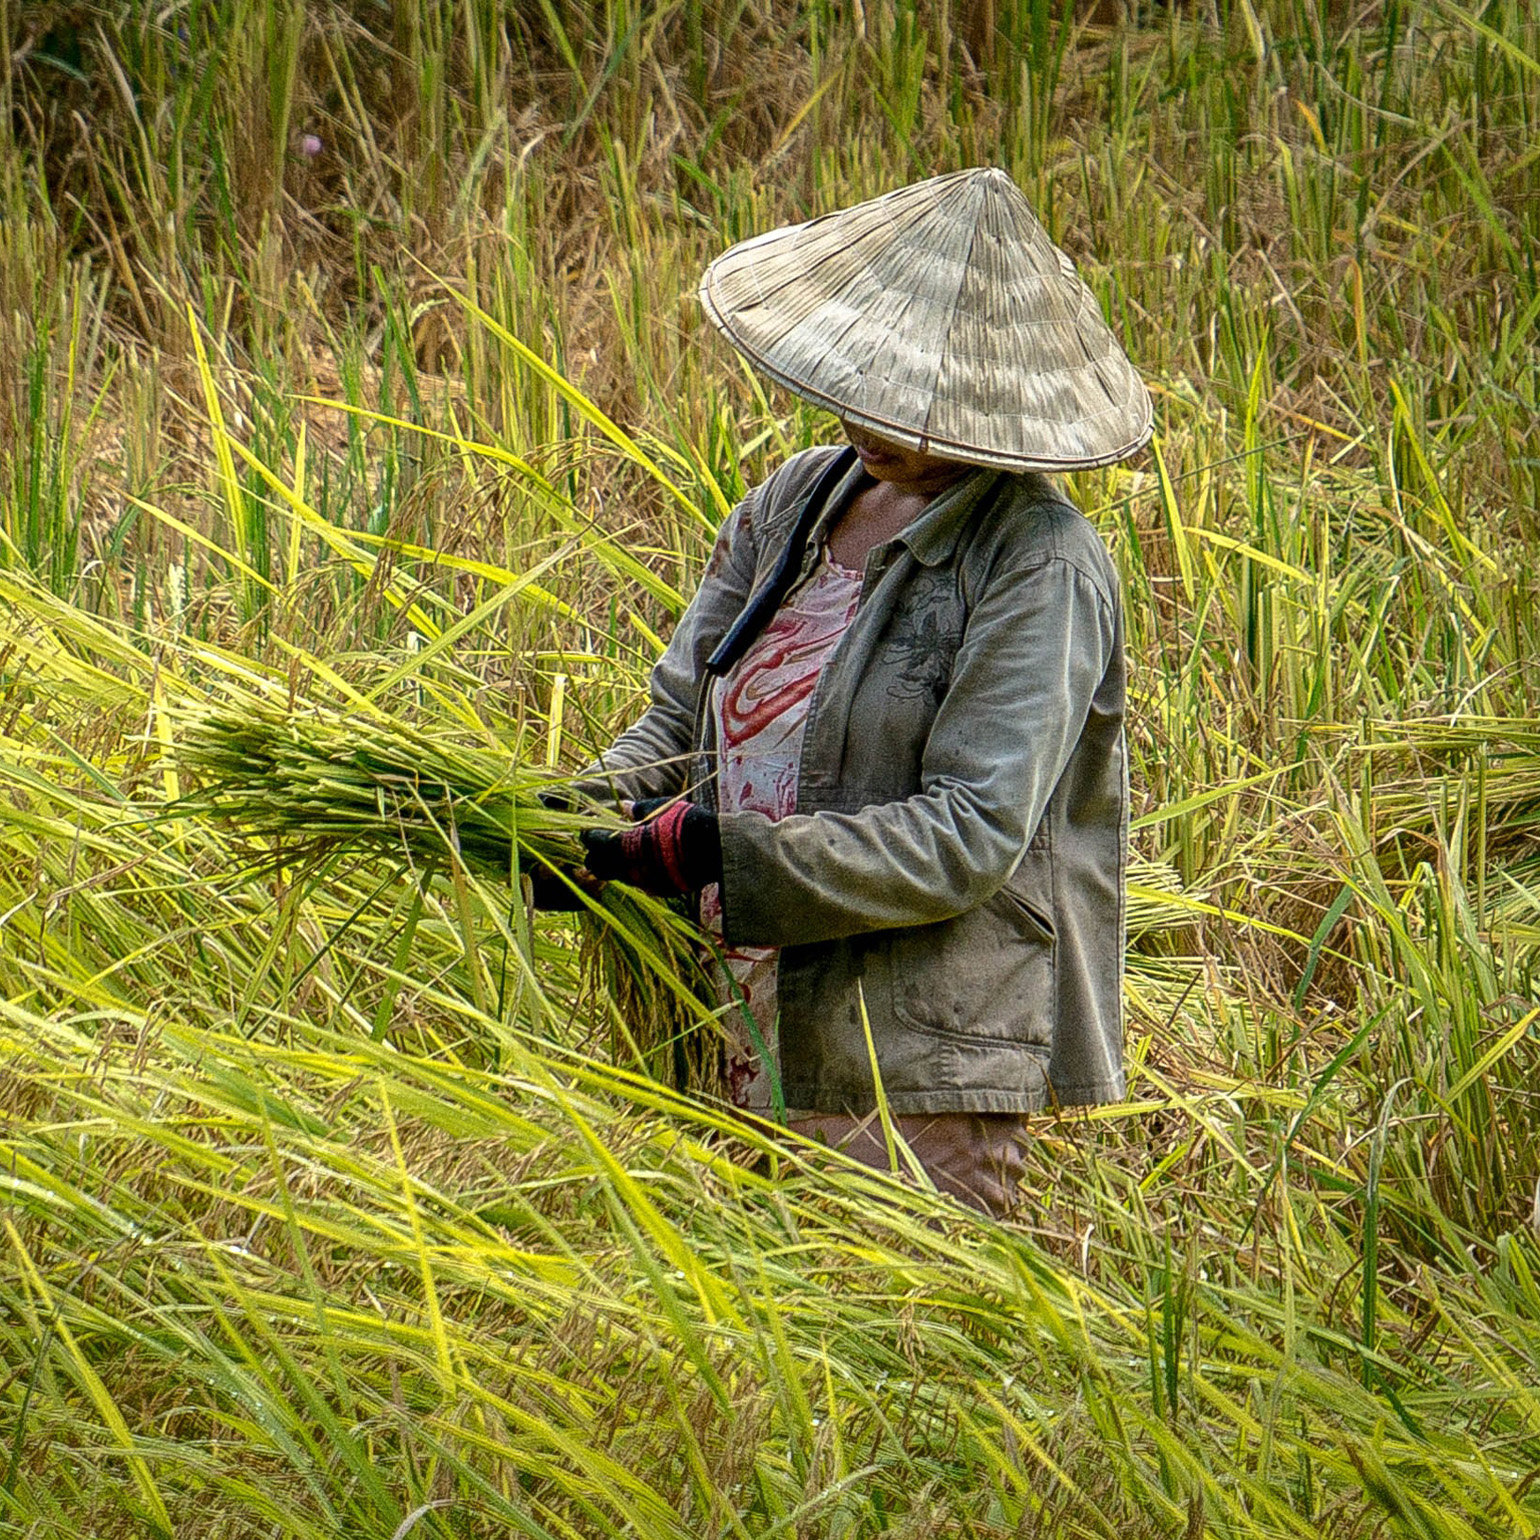 A woman standing in a rice paddy, collecting rice